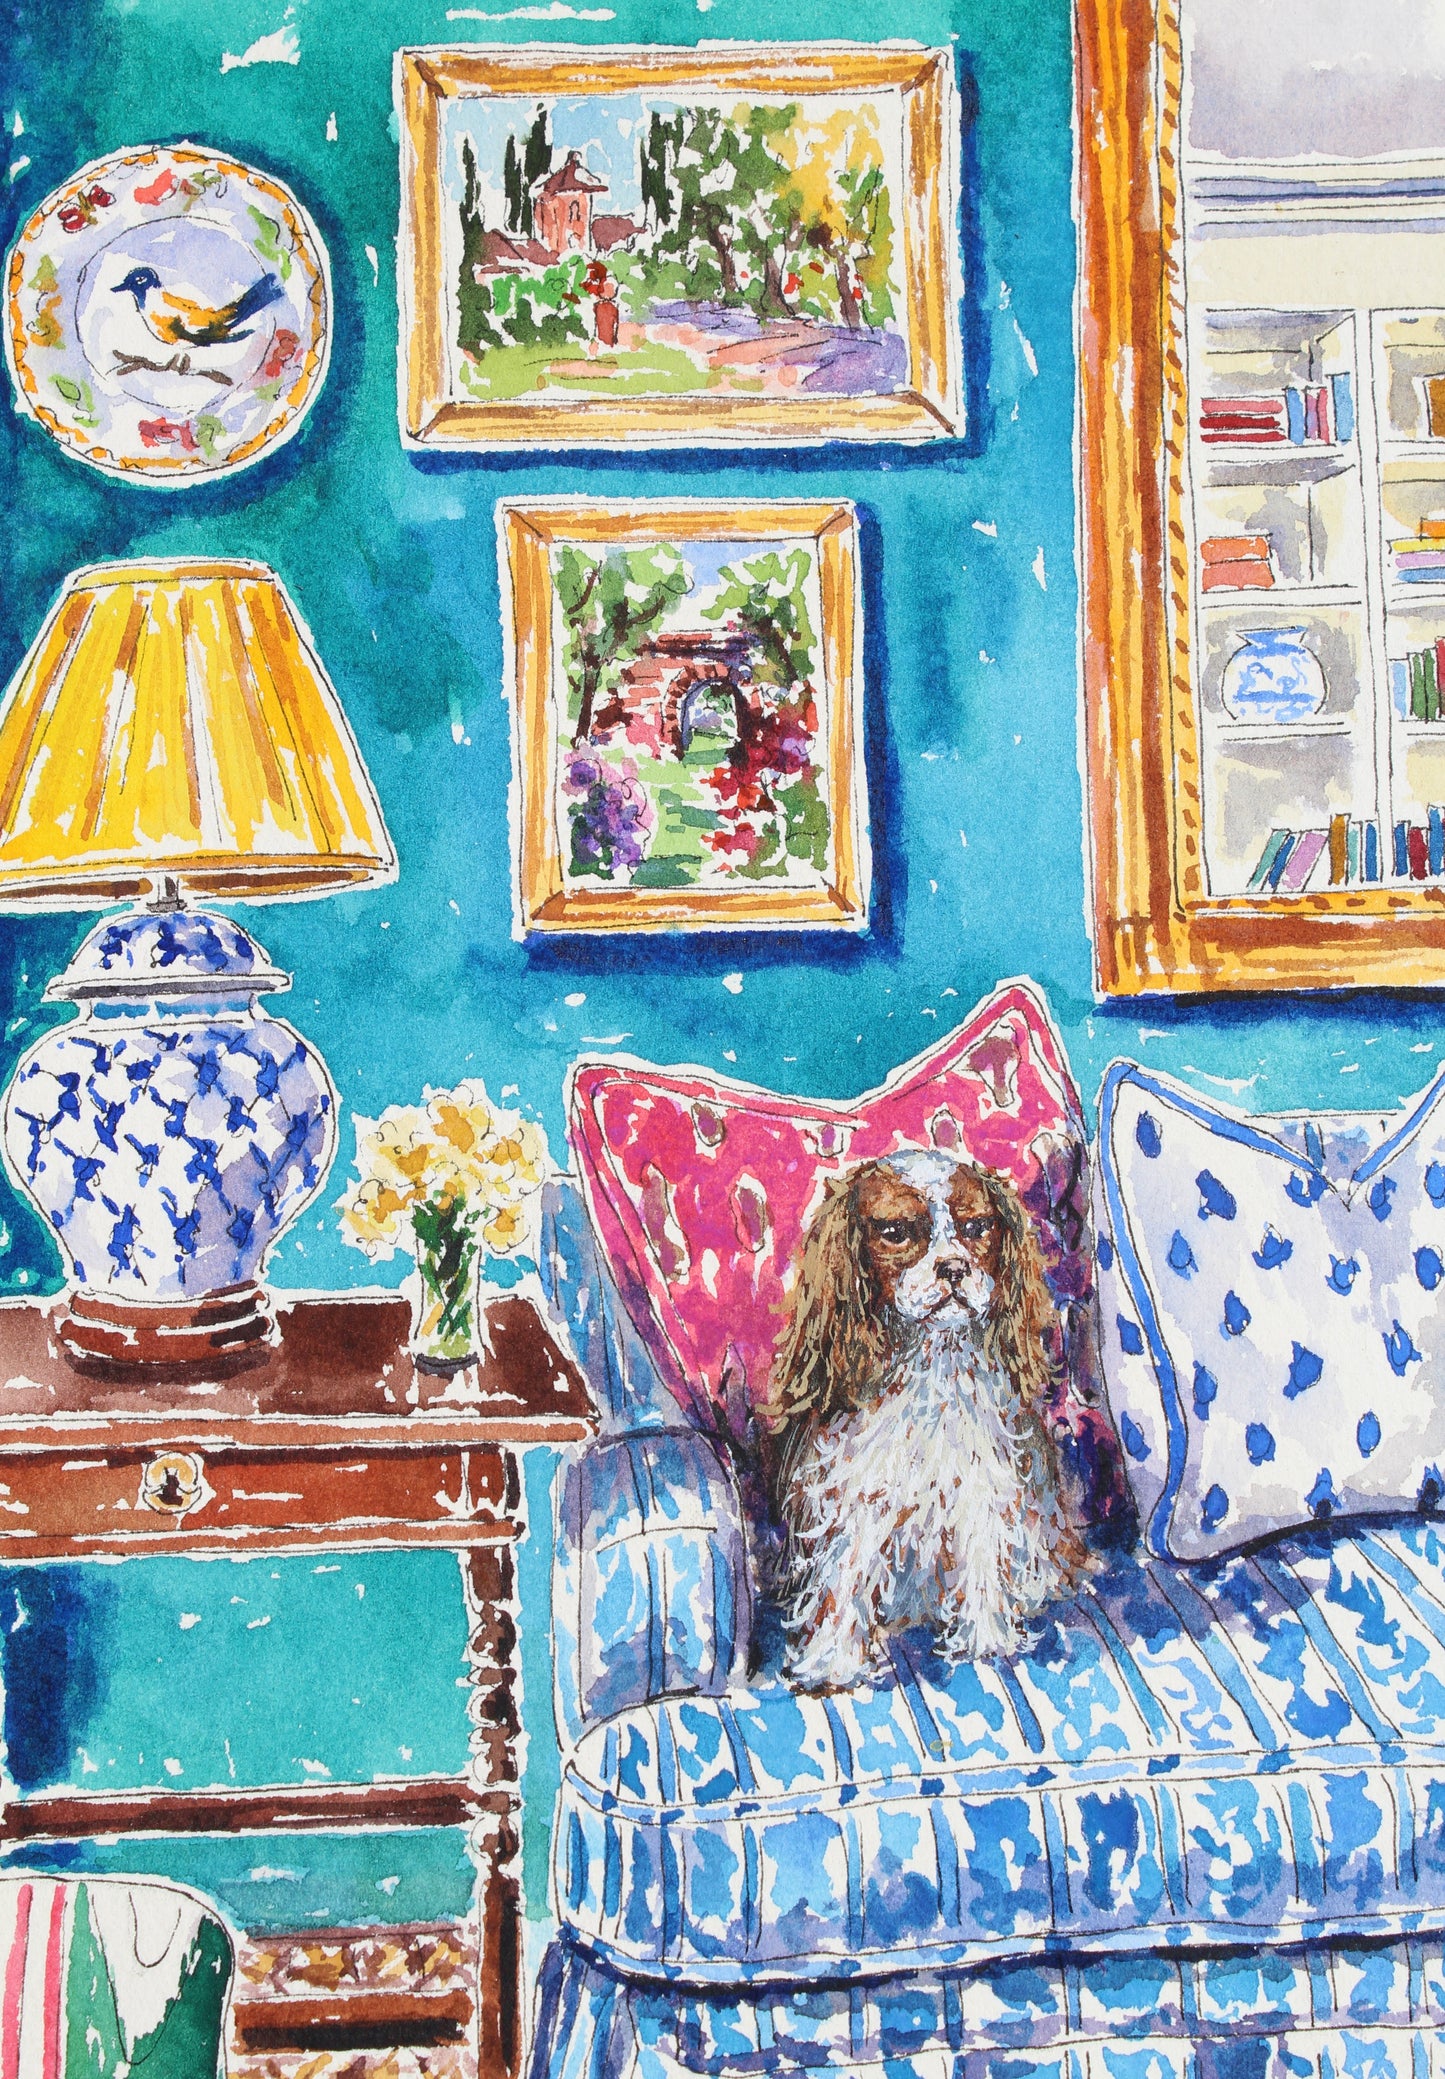 King Of The Castle, An Original 12" x 9" Interior Painting With A King Charles Cavalier Spaniel